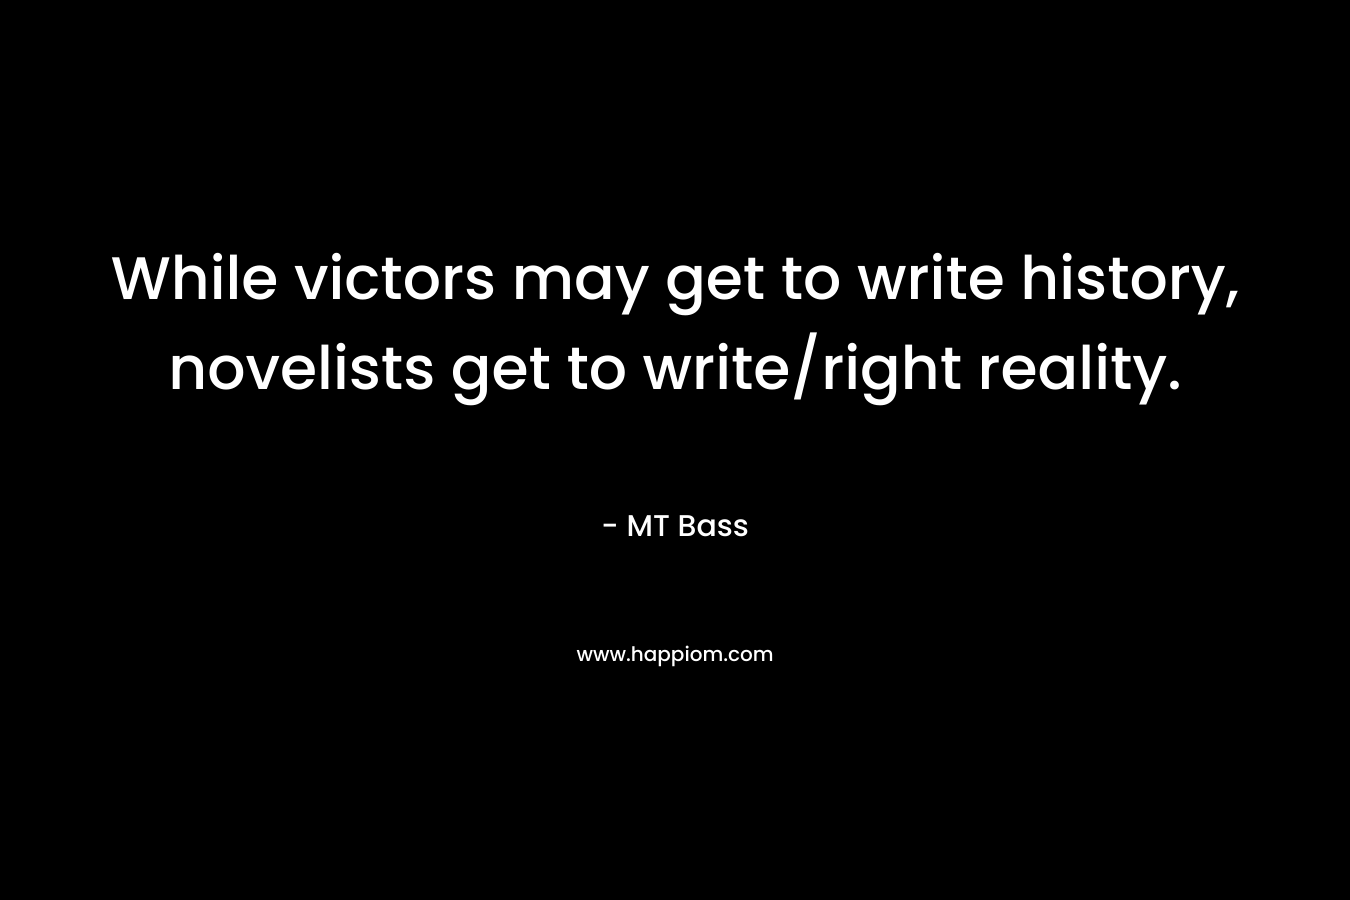 While victors may get to write history, novelists get to write/right reality. – MT Bass